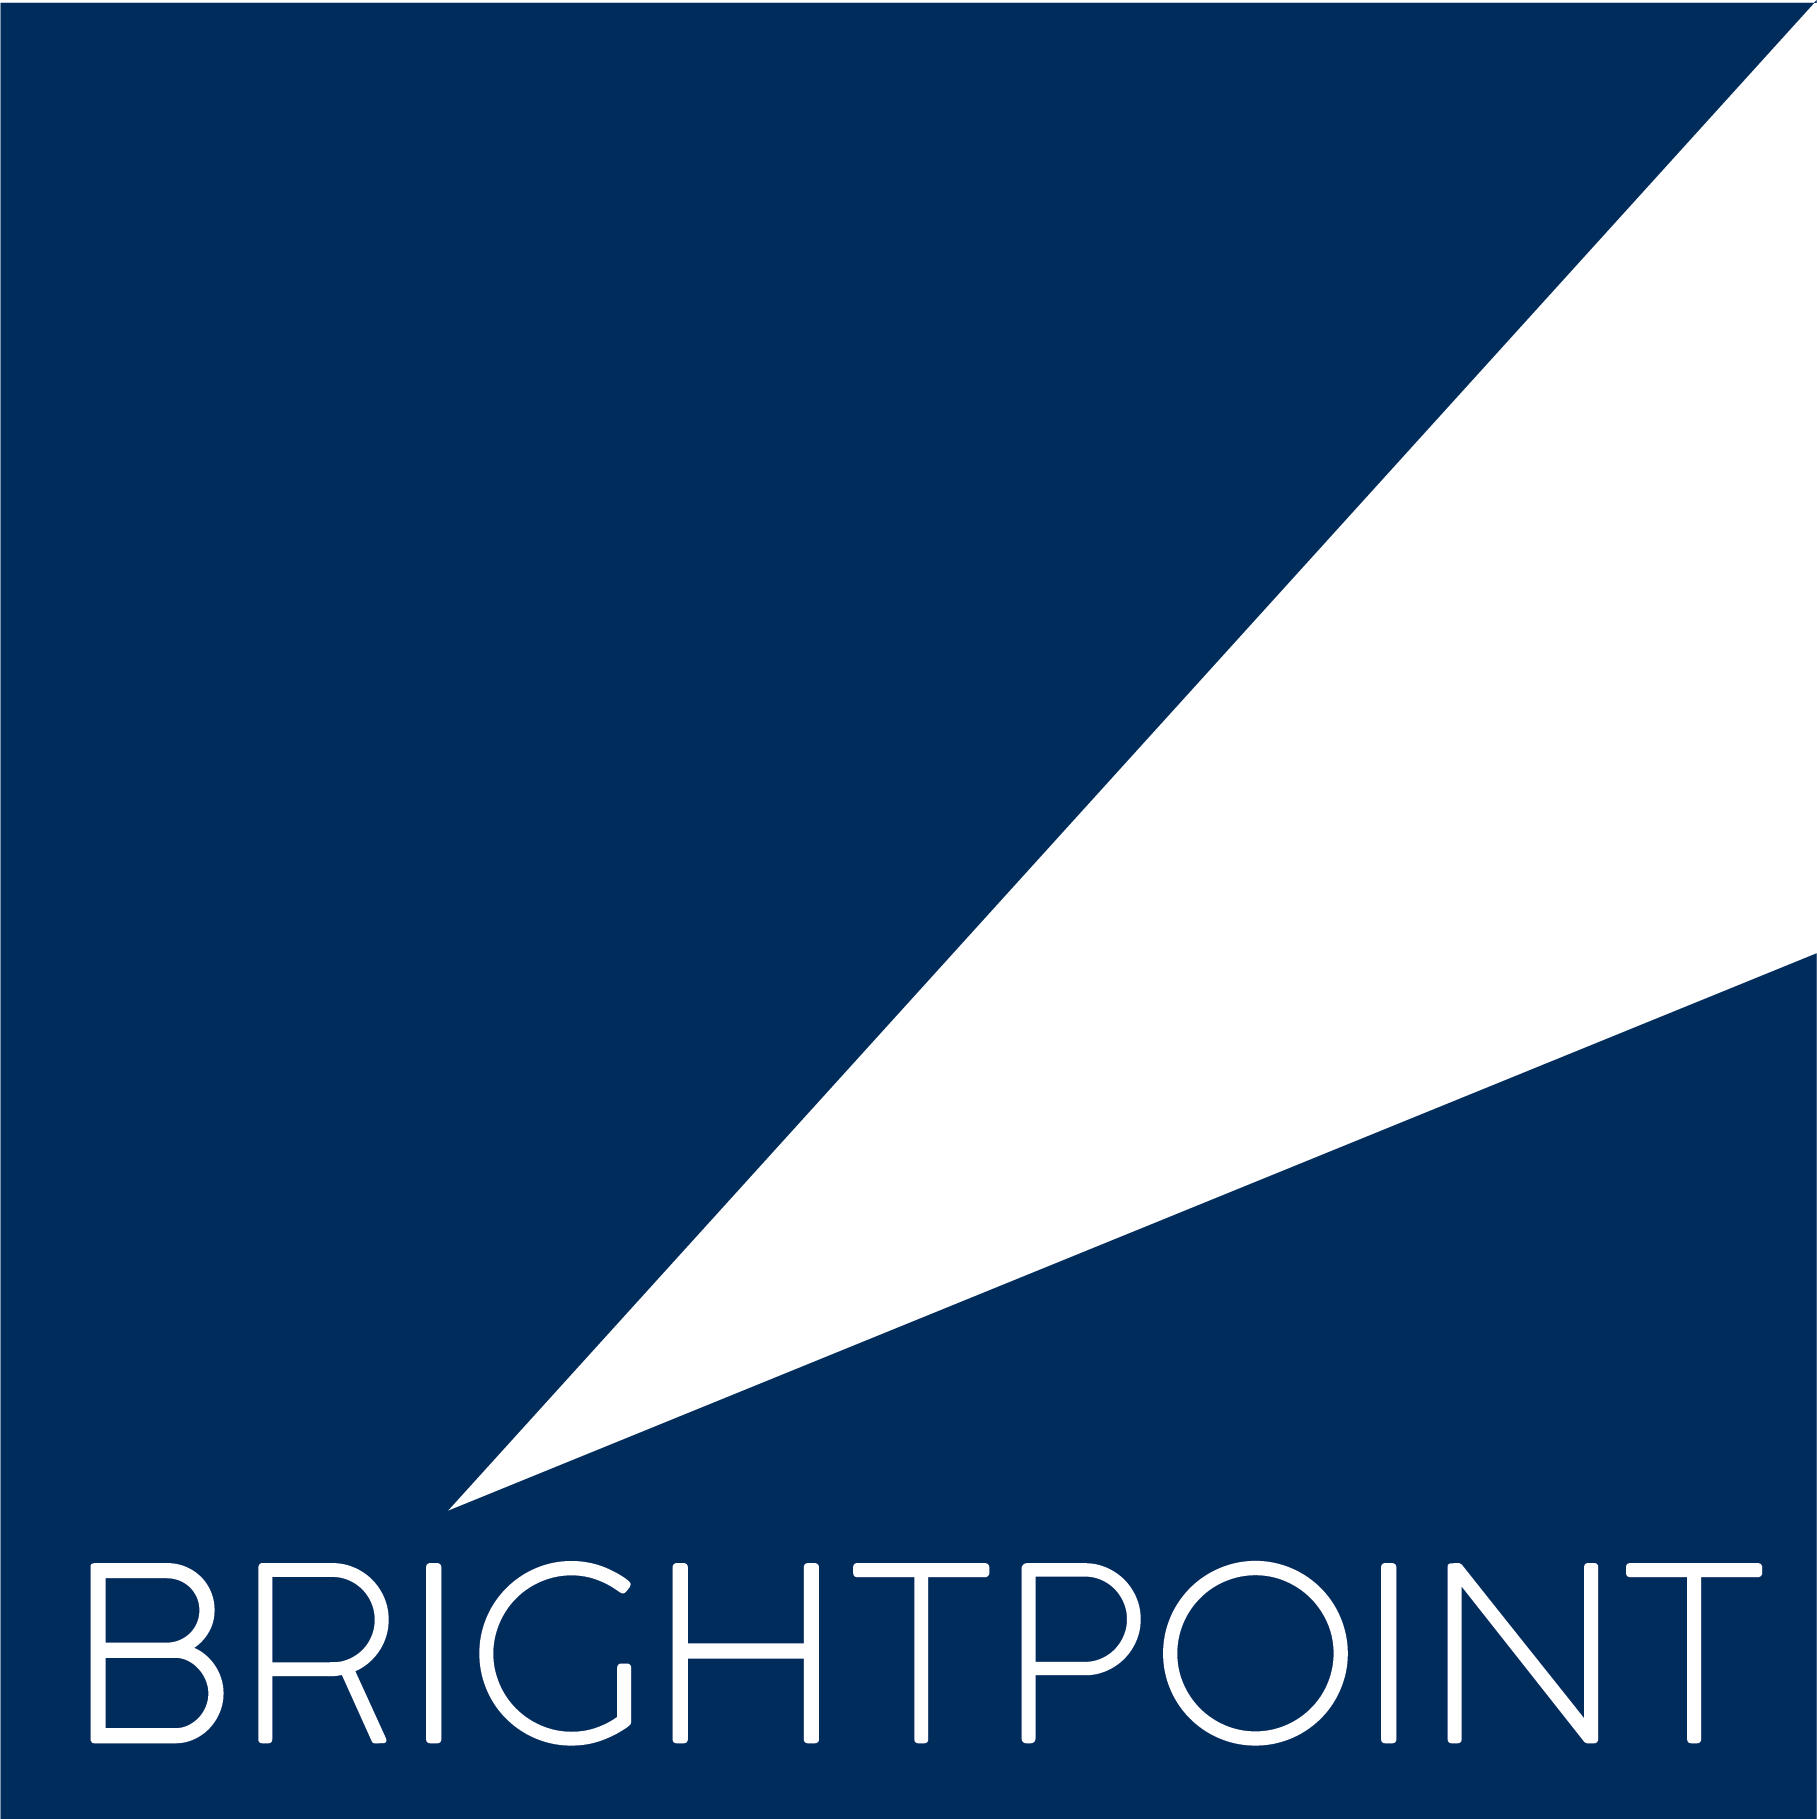 Brightpoint Logo - BrightPoint Realty Group – Real Estate Site